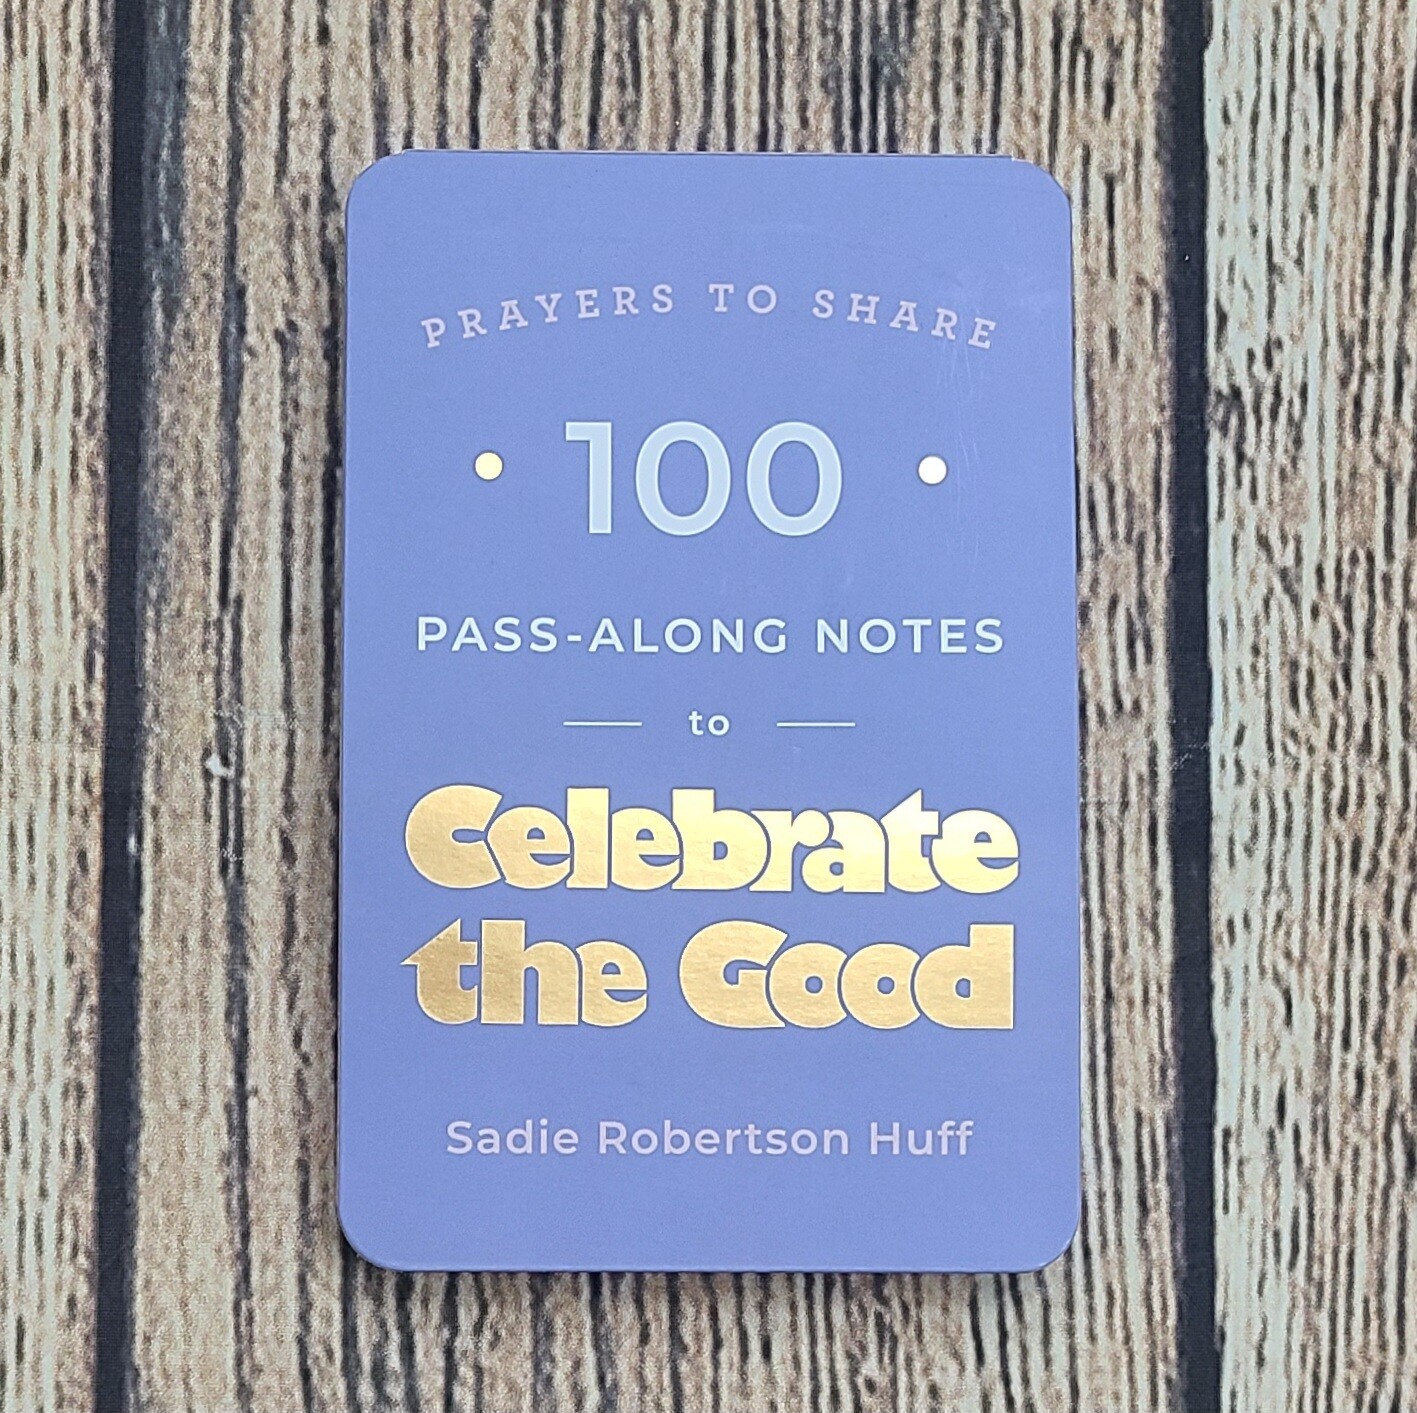 100 Pass-Along Prayers to Share to Celebrate the Good by Sadie Robertson Huff